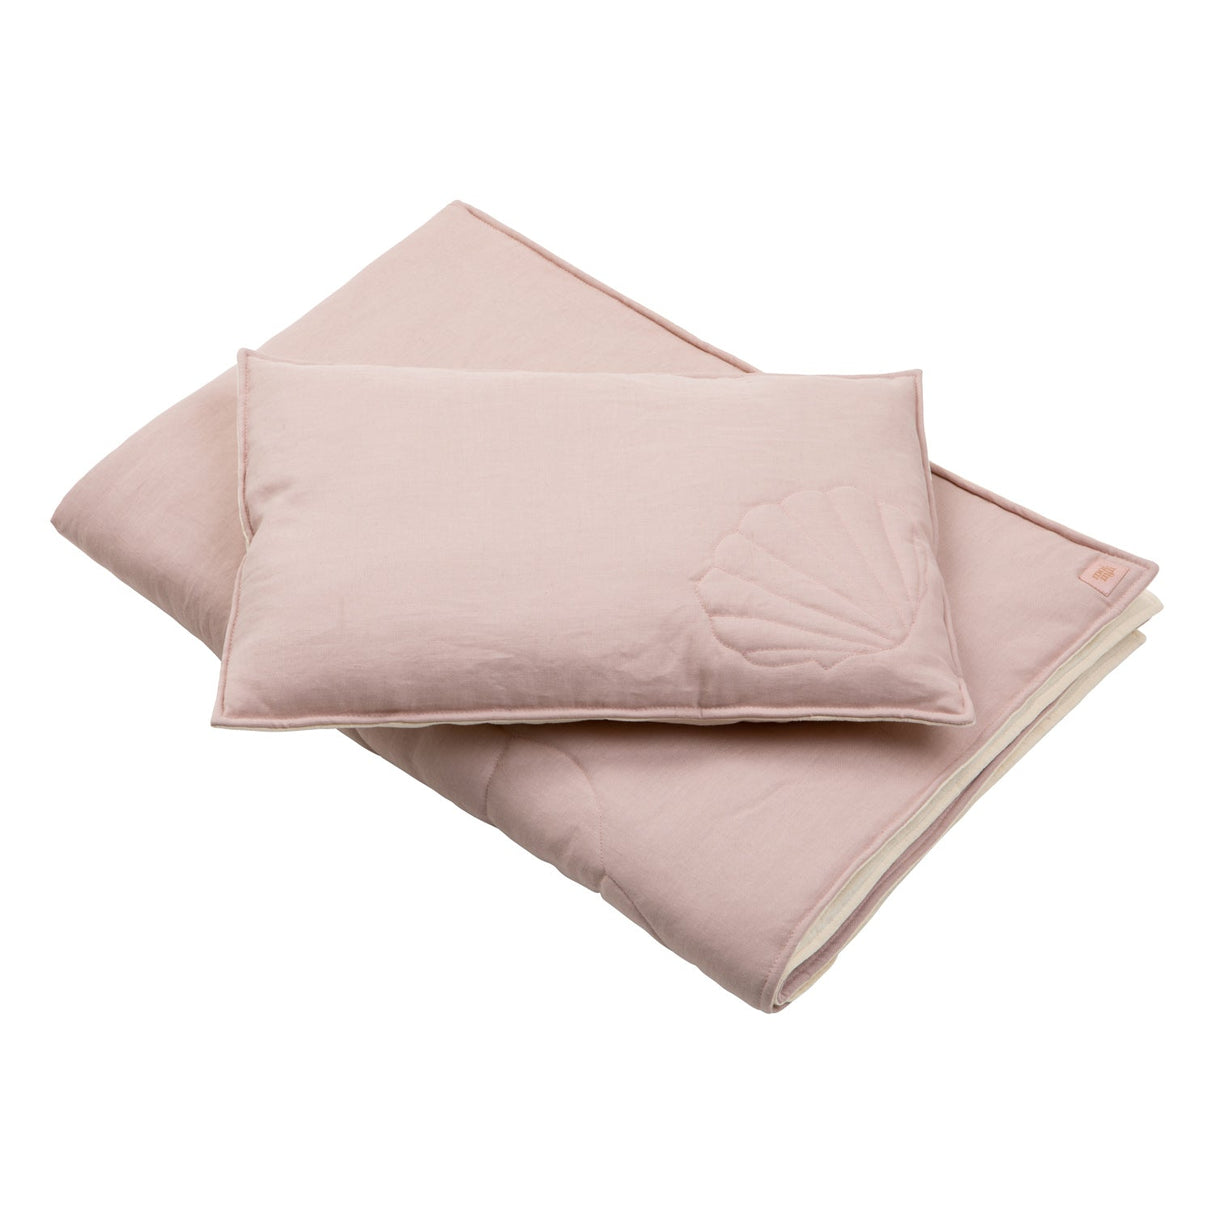 Linen "Powder Pink" Shell Child Cover Set (Large) by Moi Mili - Sumiye Co